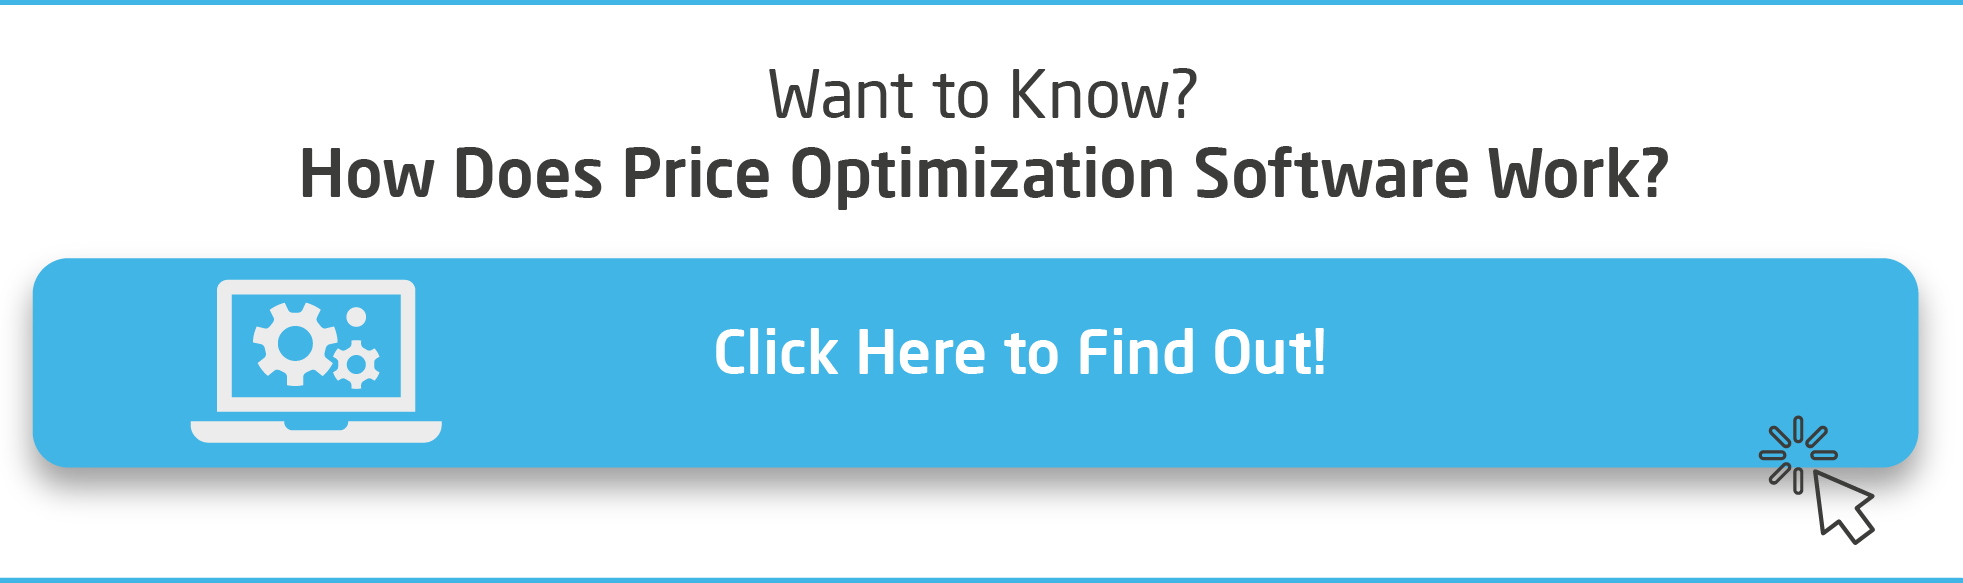 CTA_InArticle_how-does-price-optimization-software-work